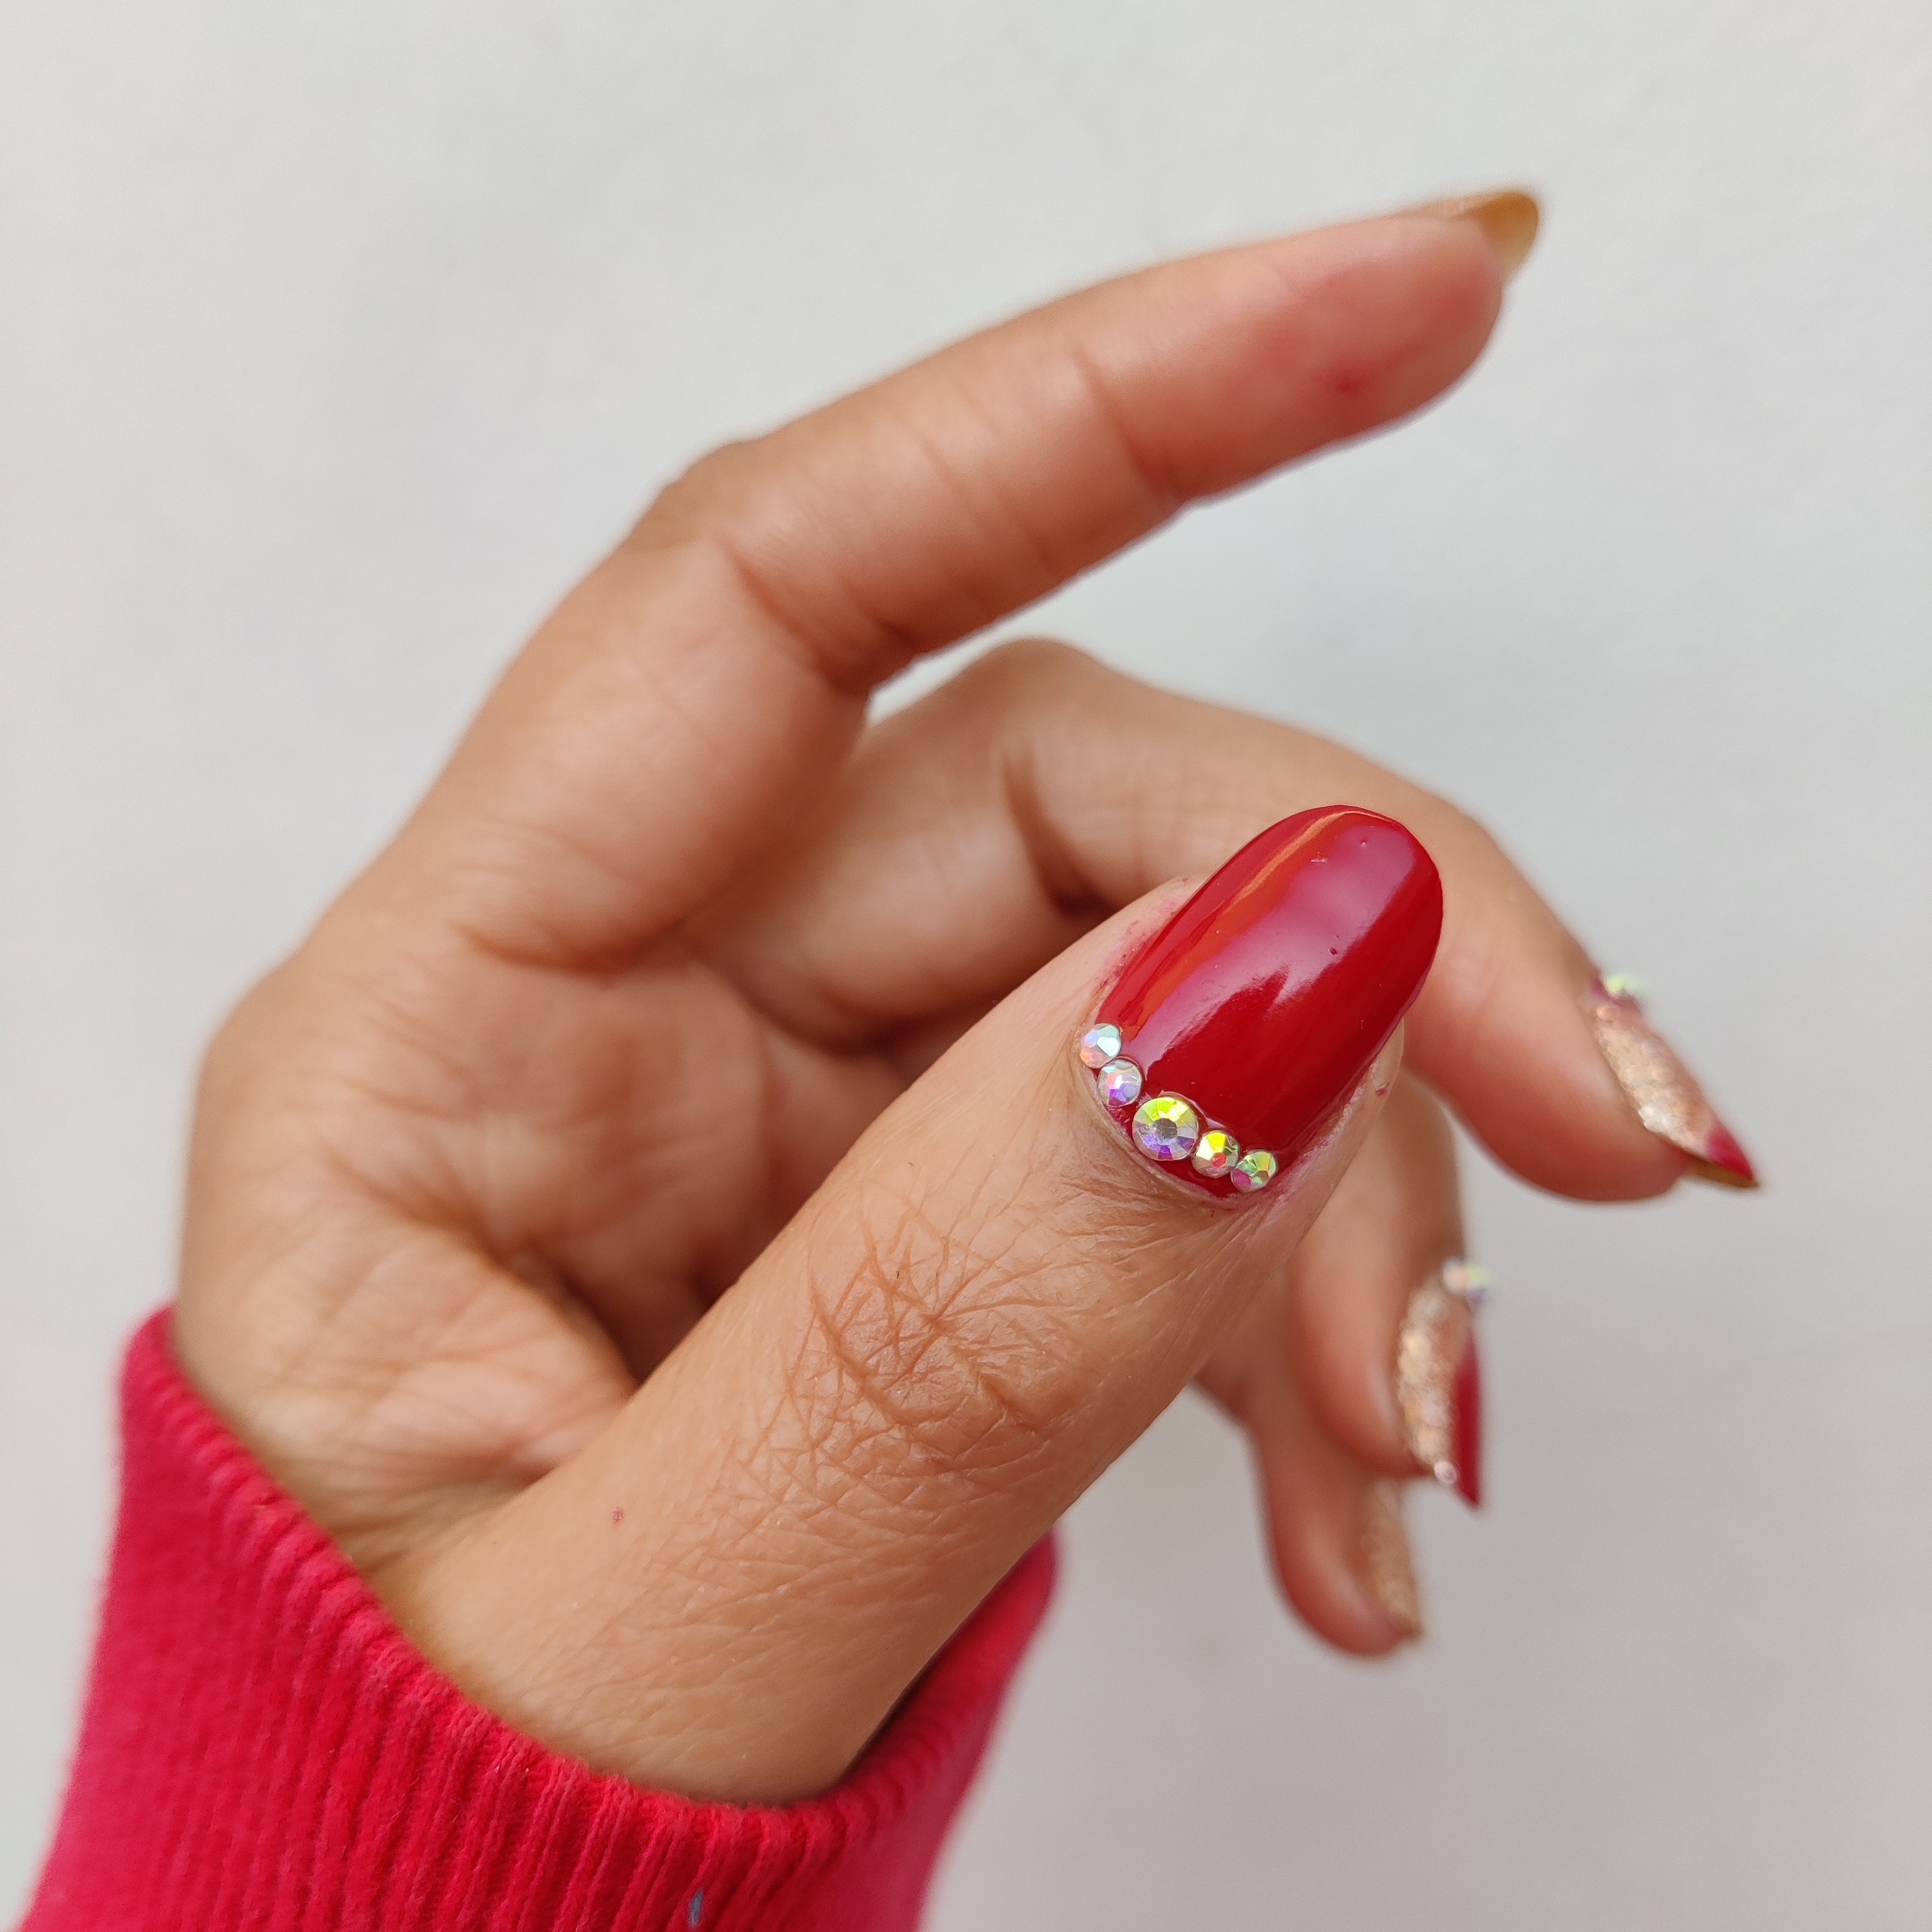 Cute Christmas and Winter Themed Nail Art Ideas for Short Nails